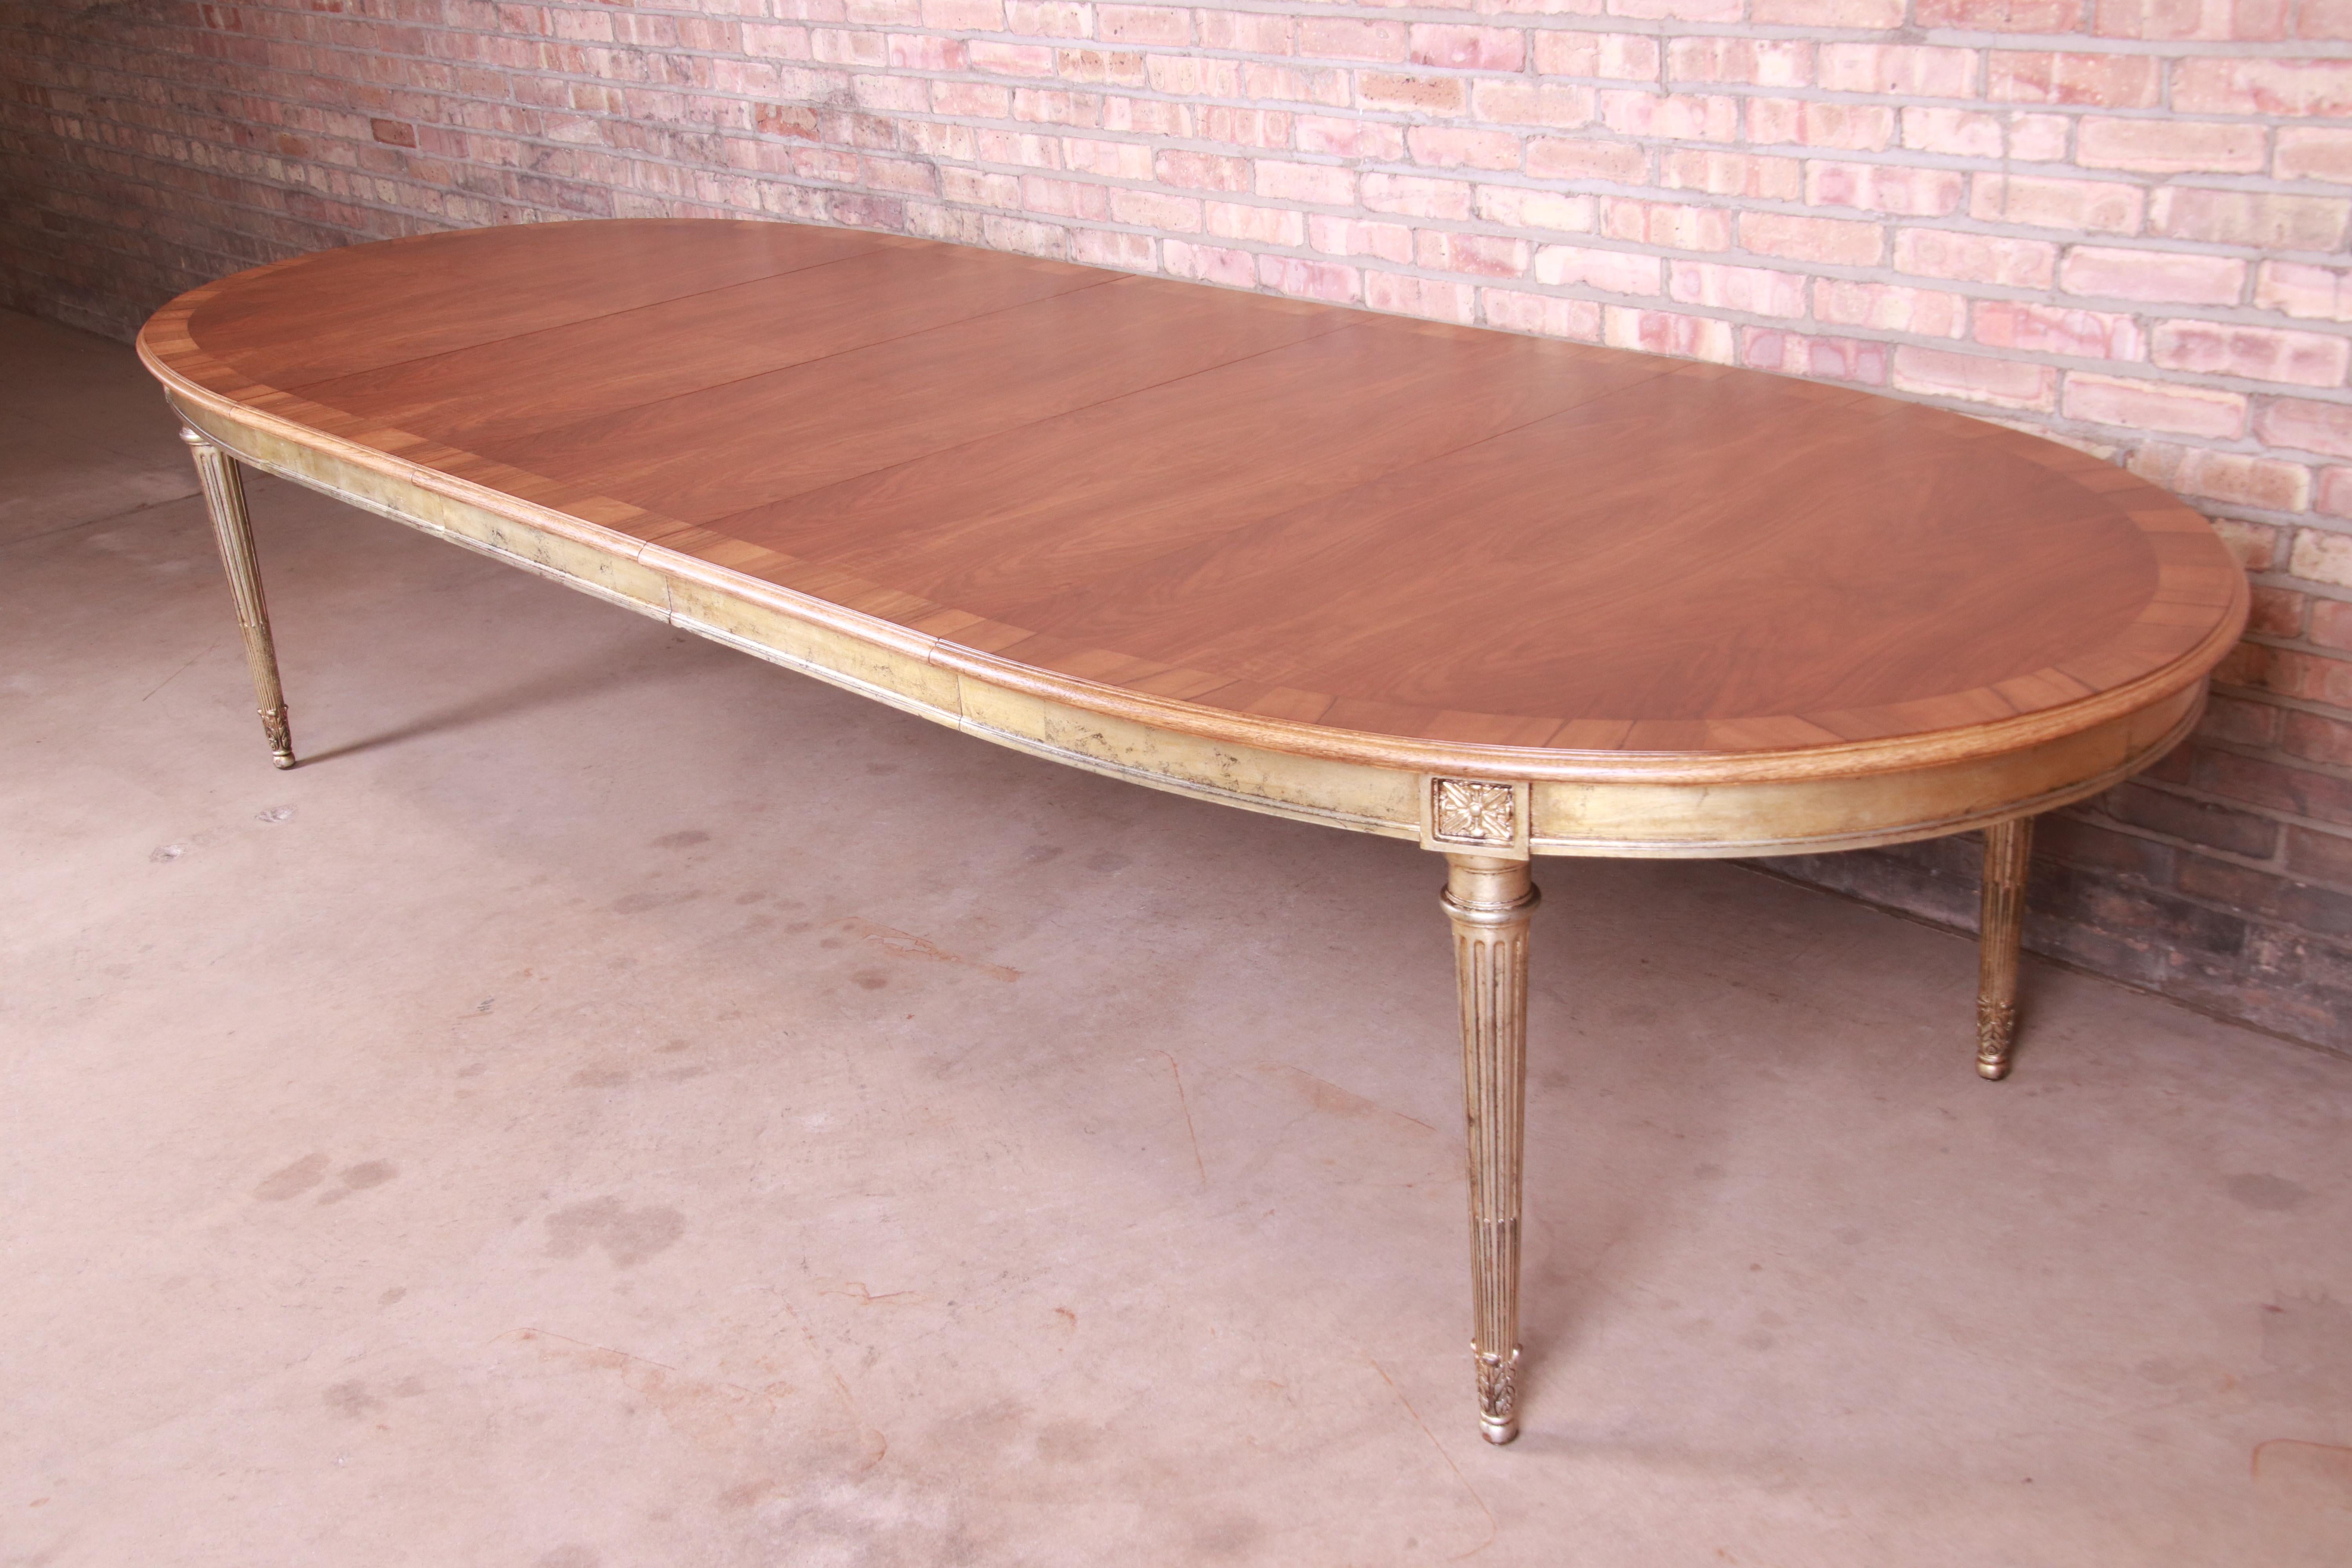 American Karges French Regency Louis XVI Walnut and Gold Gilt Dining Table, Refinished